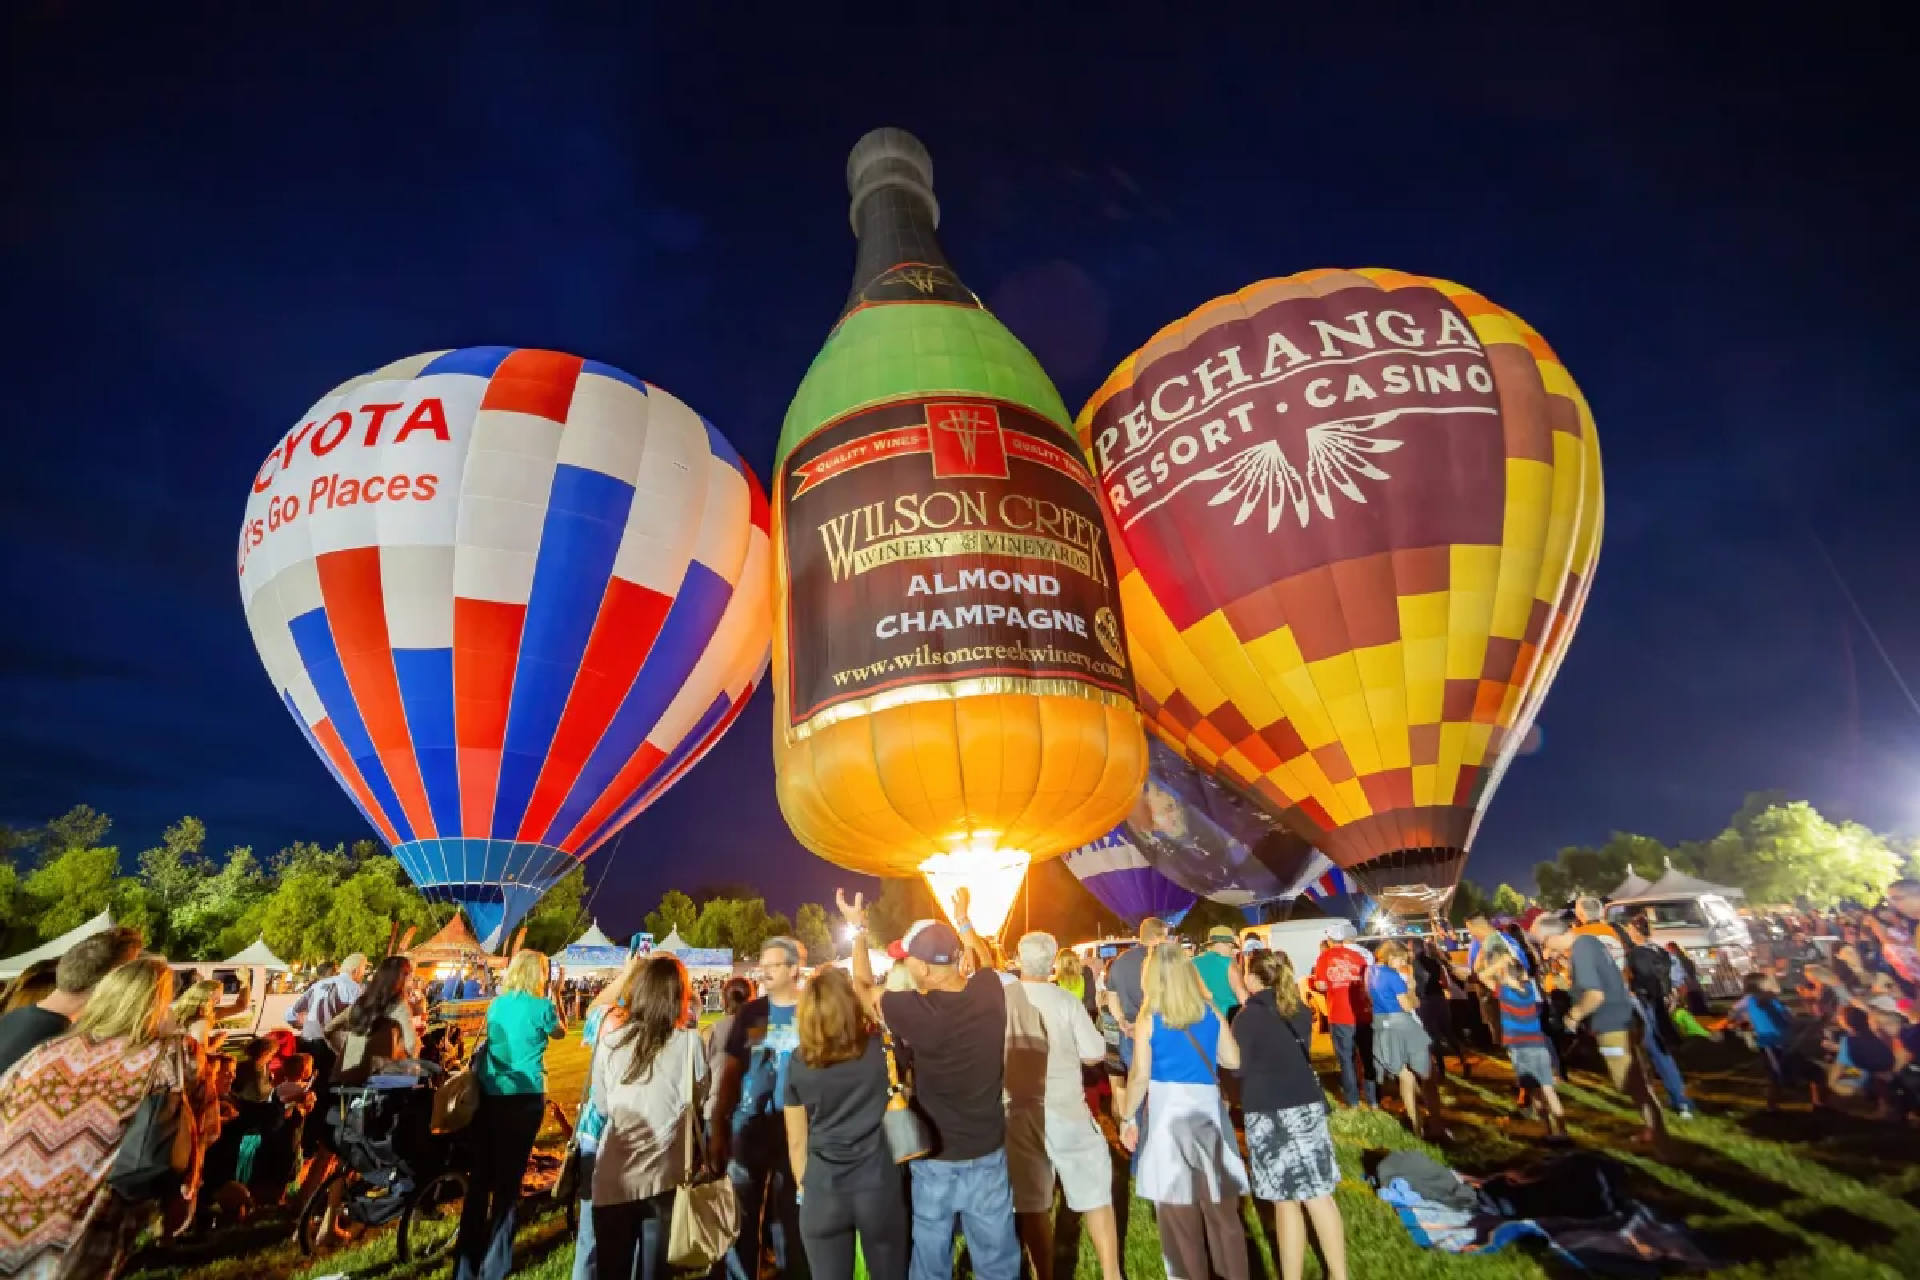 Temecula Valley Balloon and Wine Festival - Photo courtesy of Kit Leong on Shutterstock